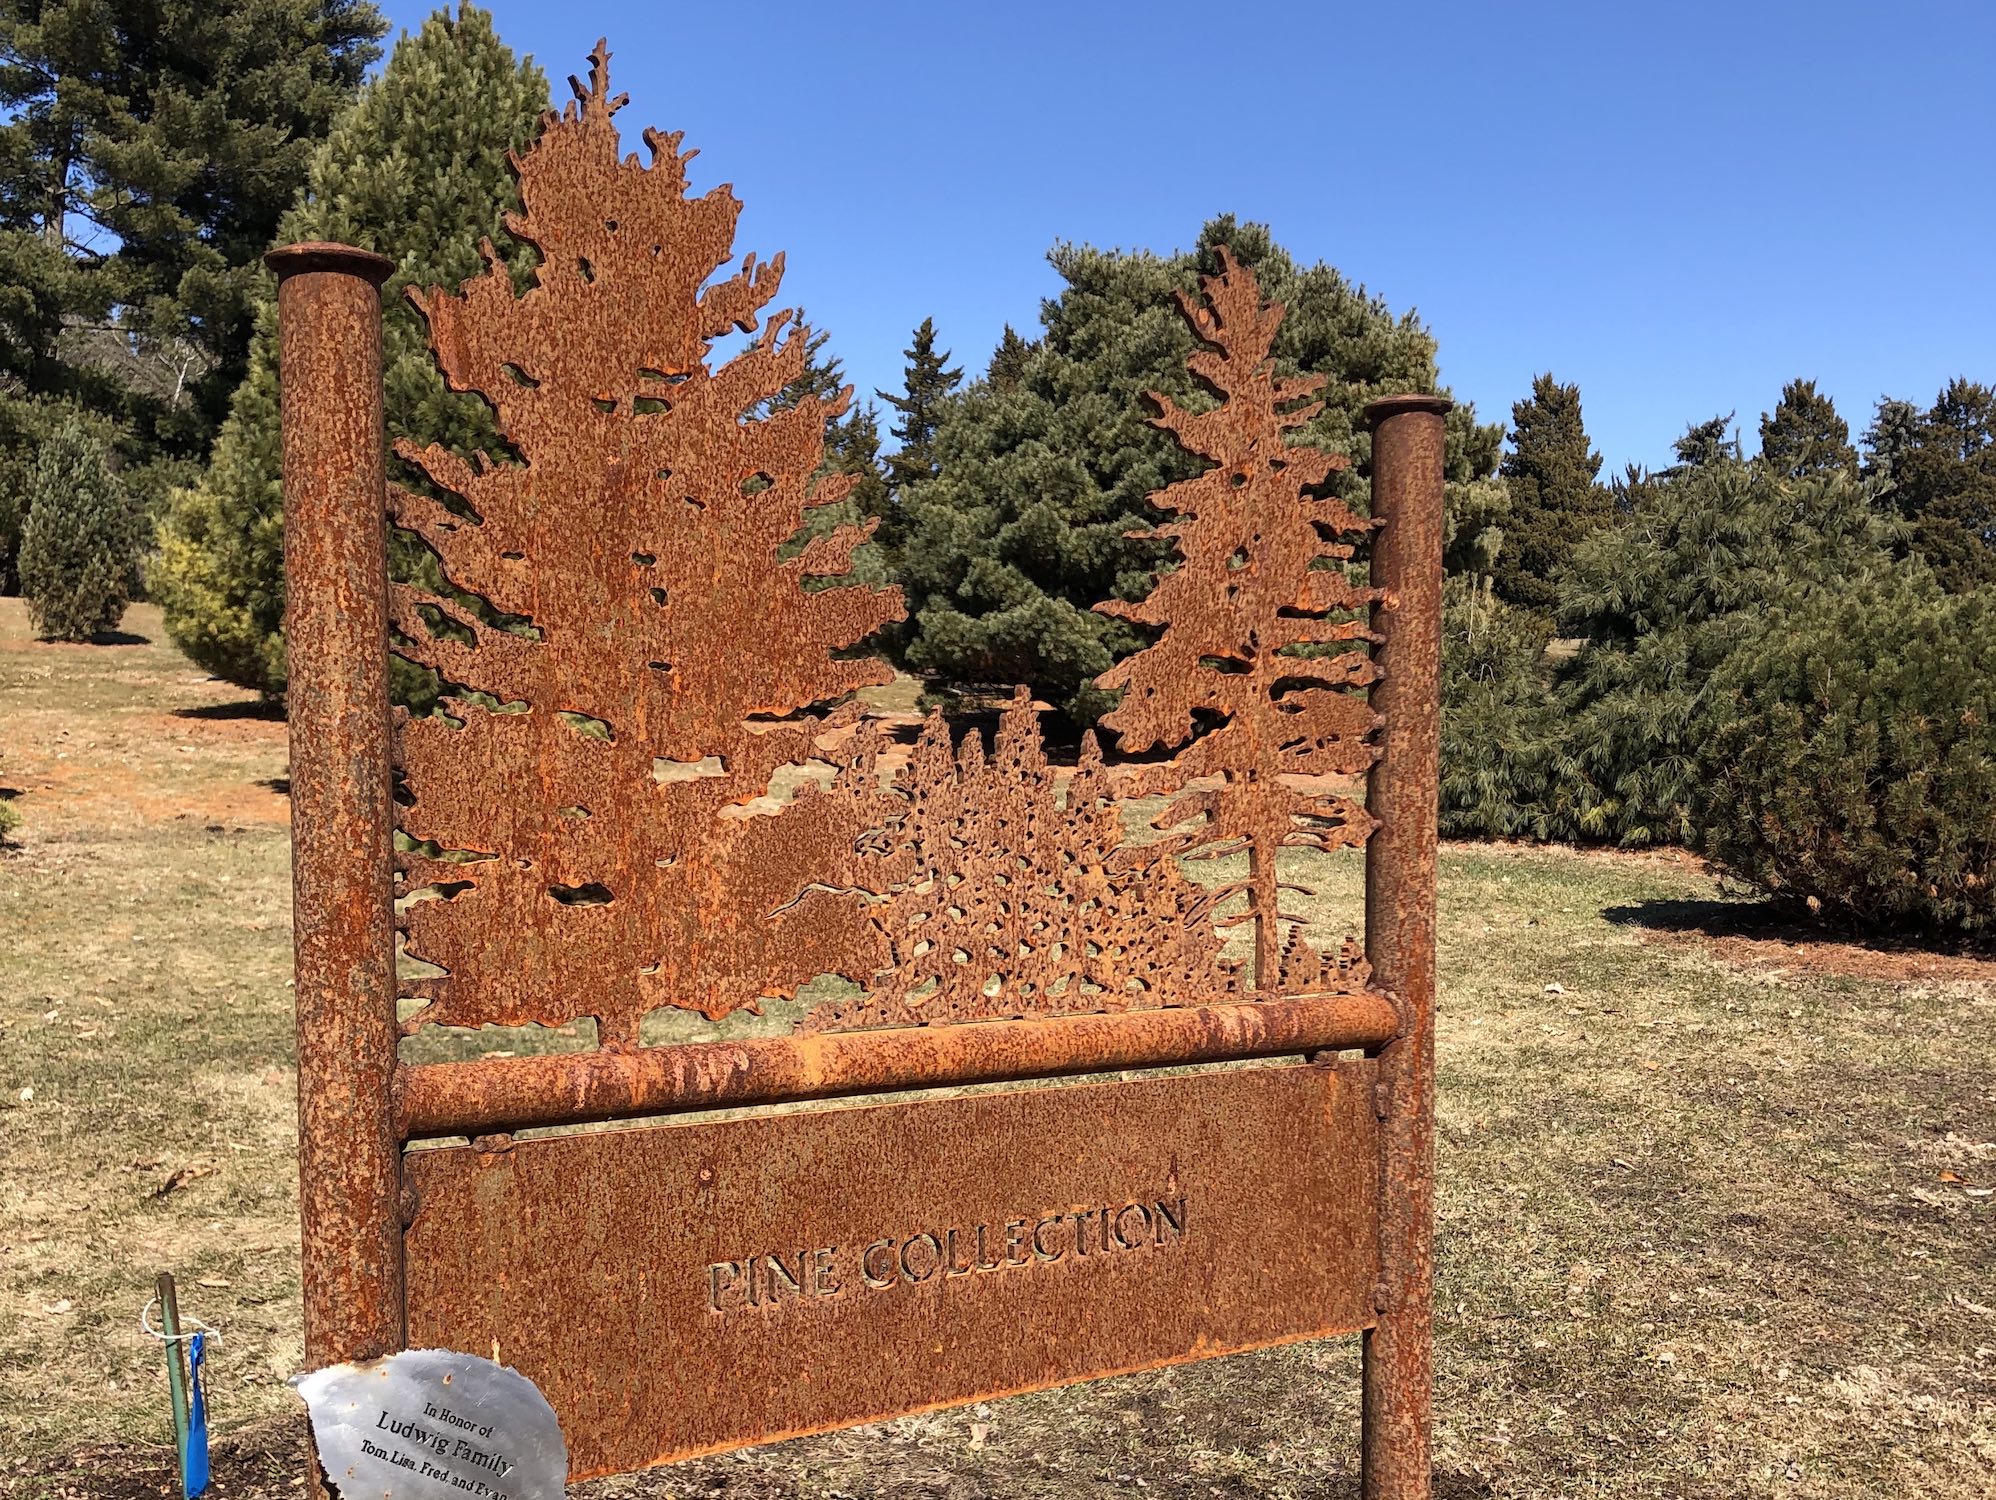 Metal cutout sign for Pine Collection in Longenecker Gardens at the University of Wisconsin Arboretum.